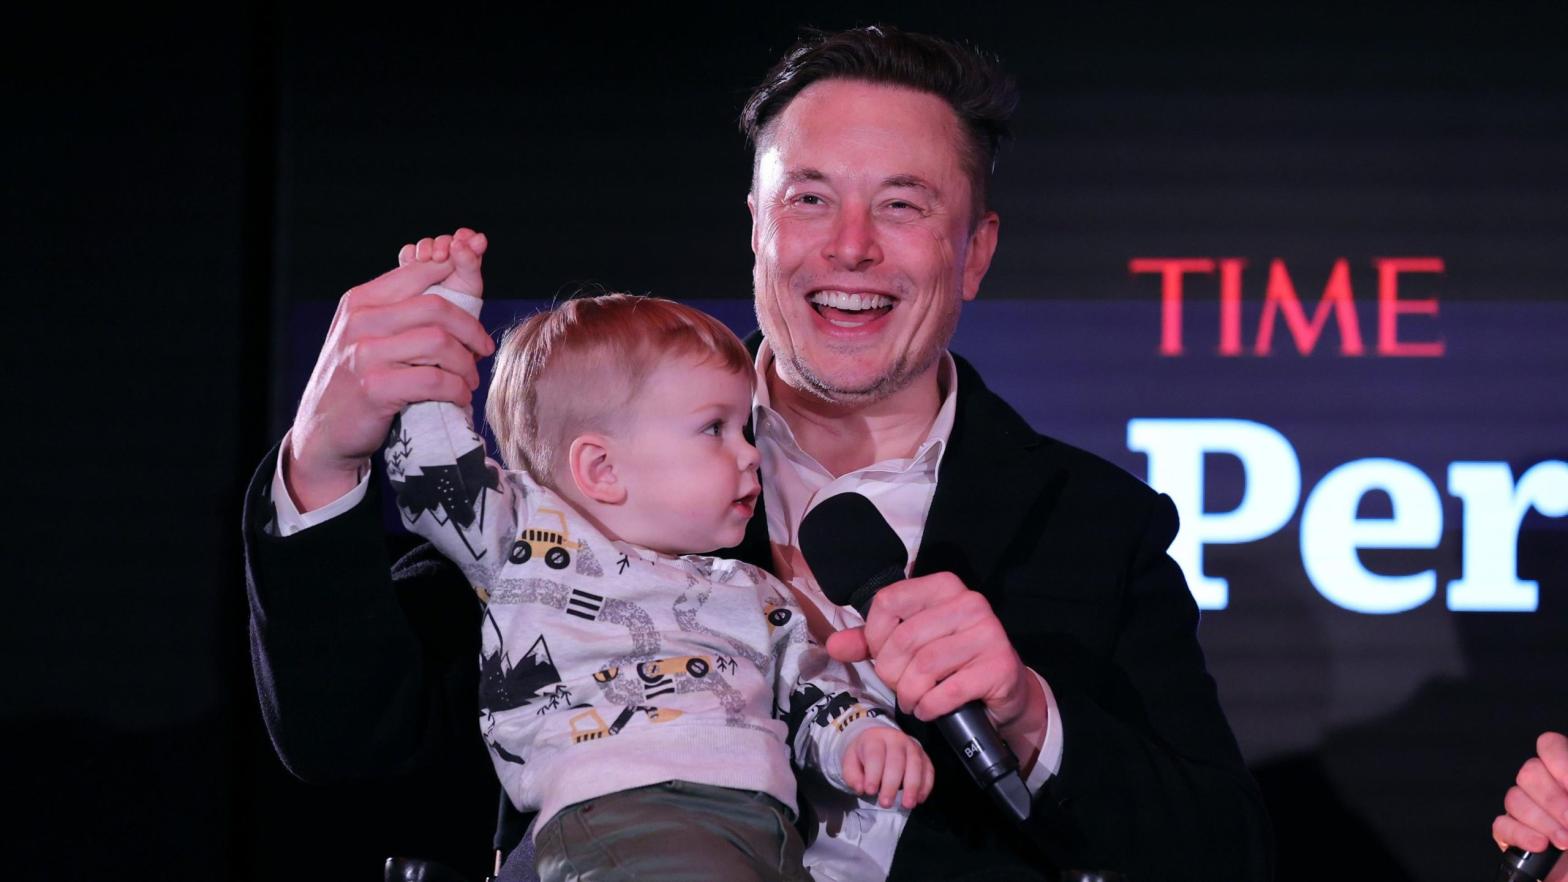 Elon Musk and son X Æ A-12 on stage TIME Person of the Year on December 13, 2021 in New York City. (Photo: Theo Wargo, Getty Images)